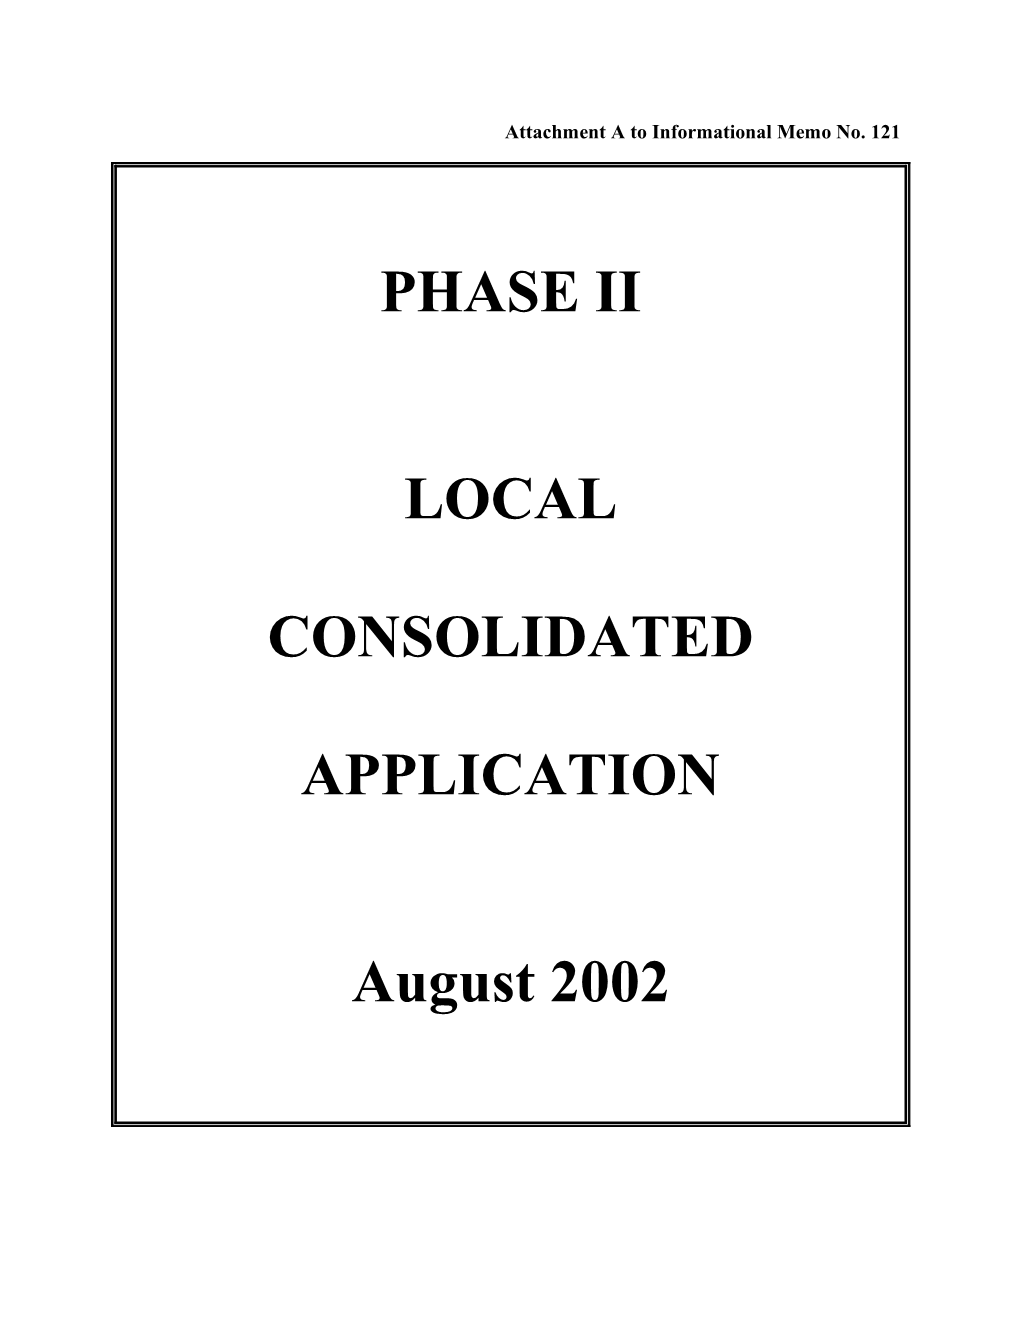 Local Consolidated Application Instructions